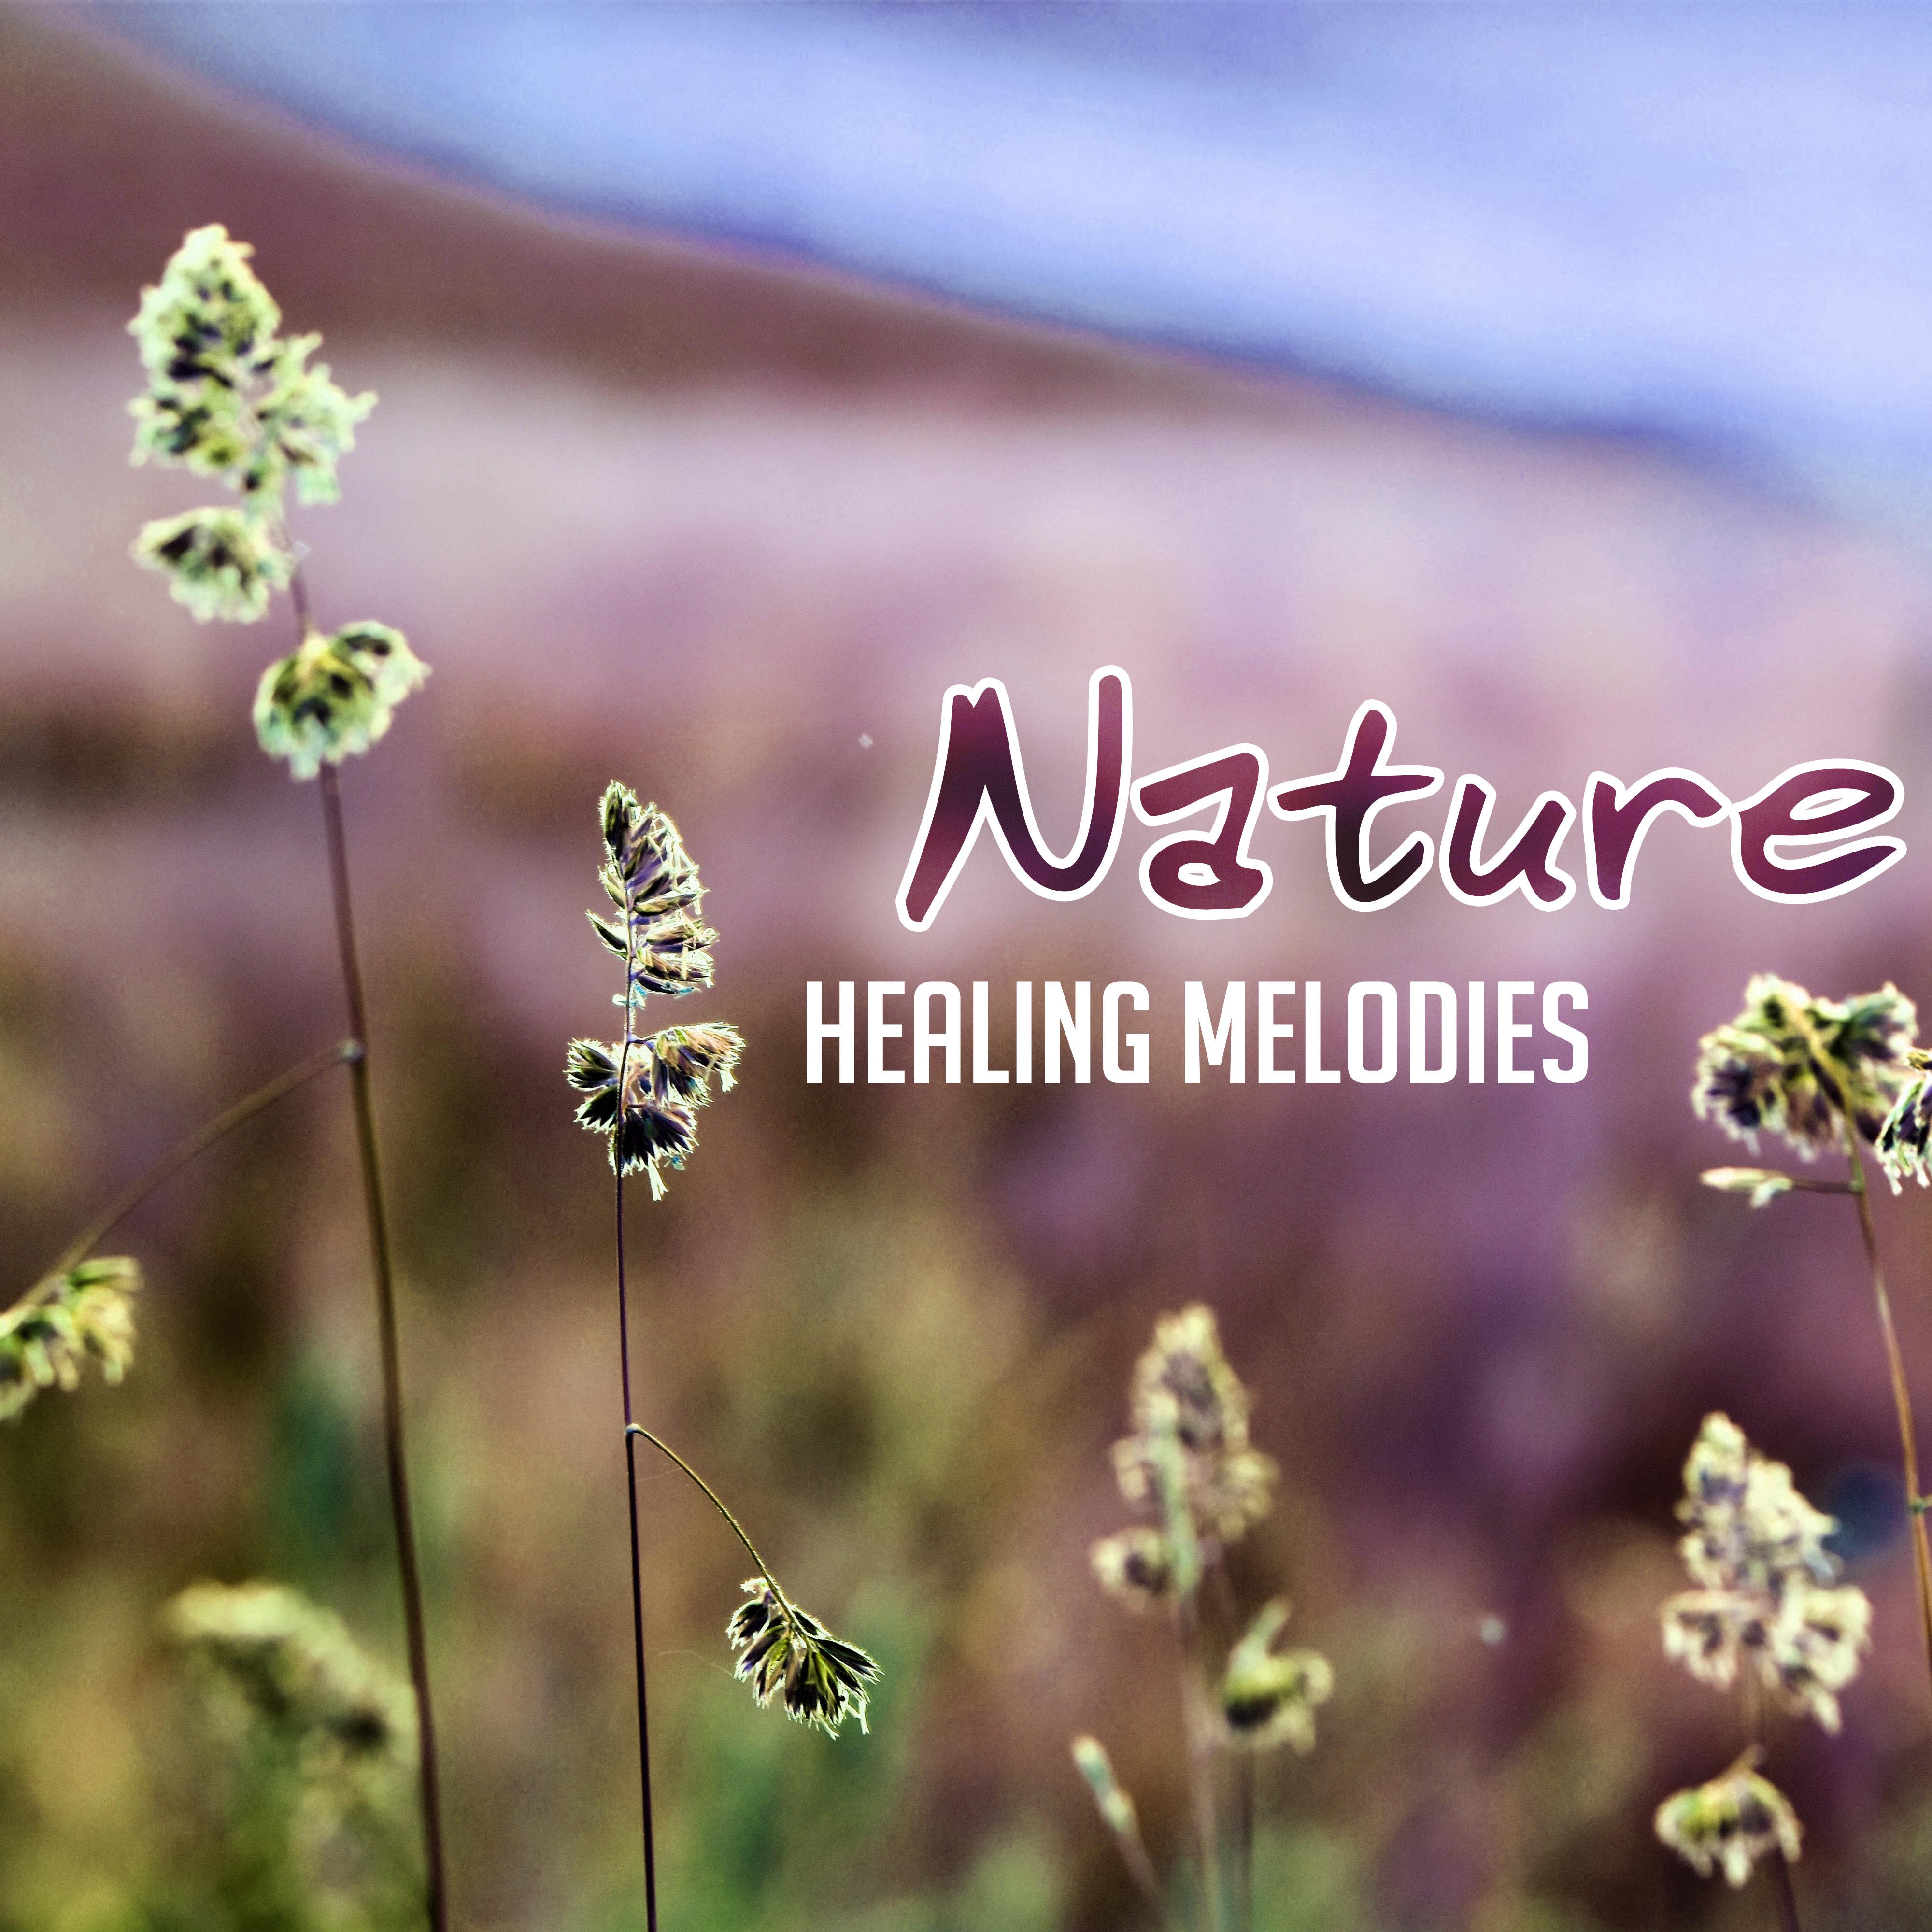 Nature Healing Melodies – Soft New Age Music, Healing Sounds for Mind & Body, Chill a Bit